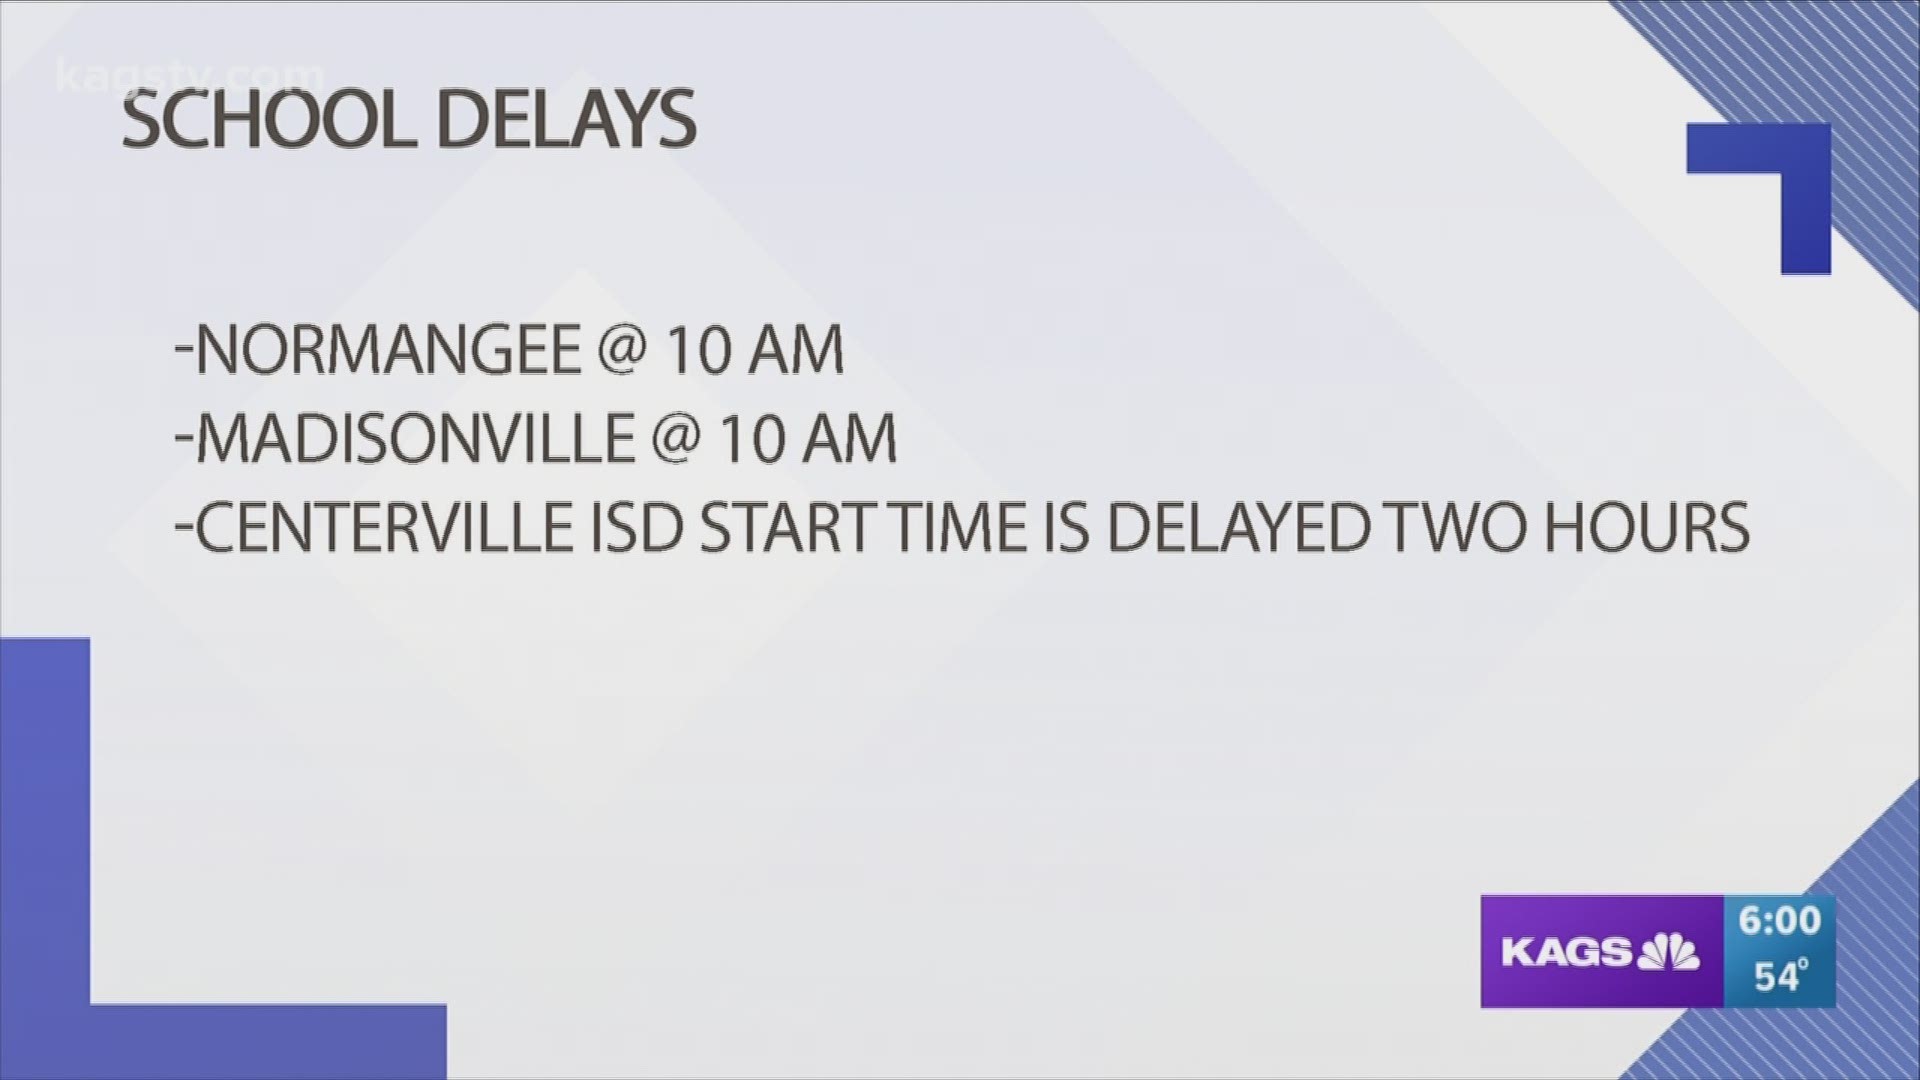 Many schools in the area are having delayed starts Tomorrow morning due to the flooding.